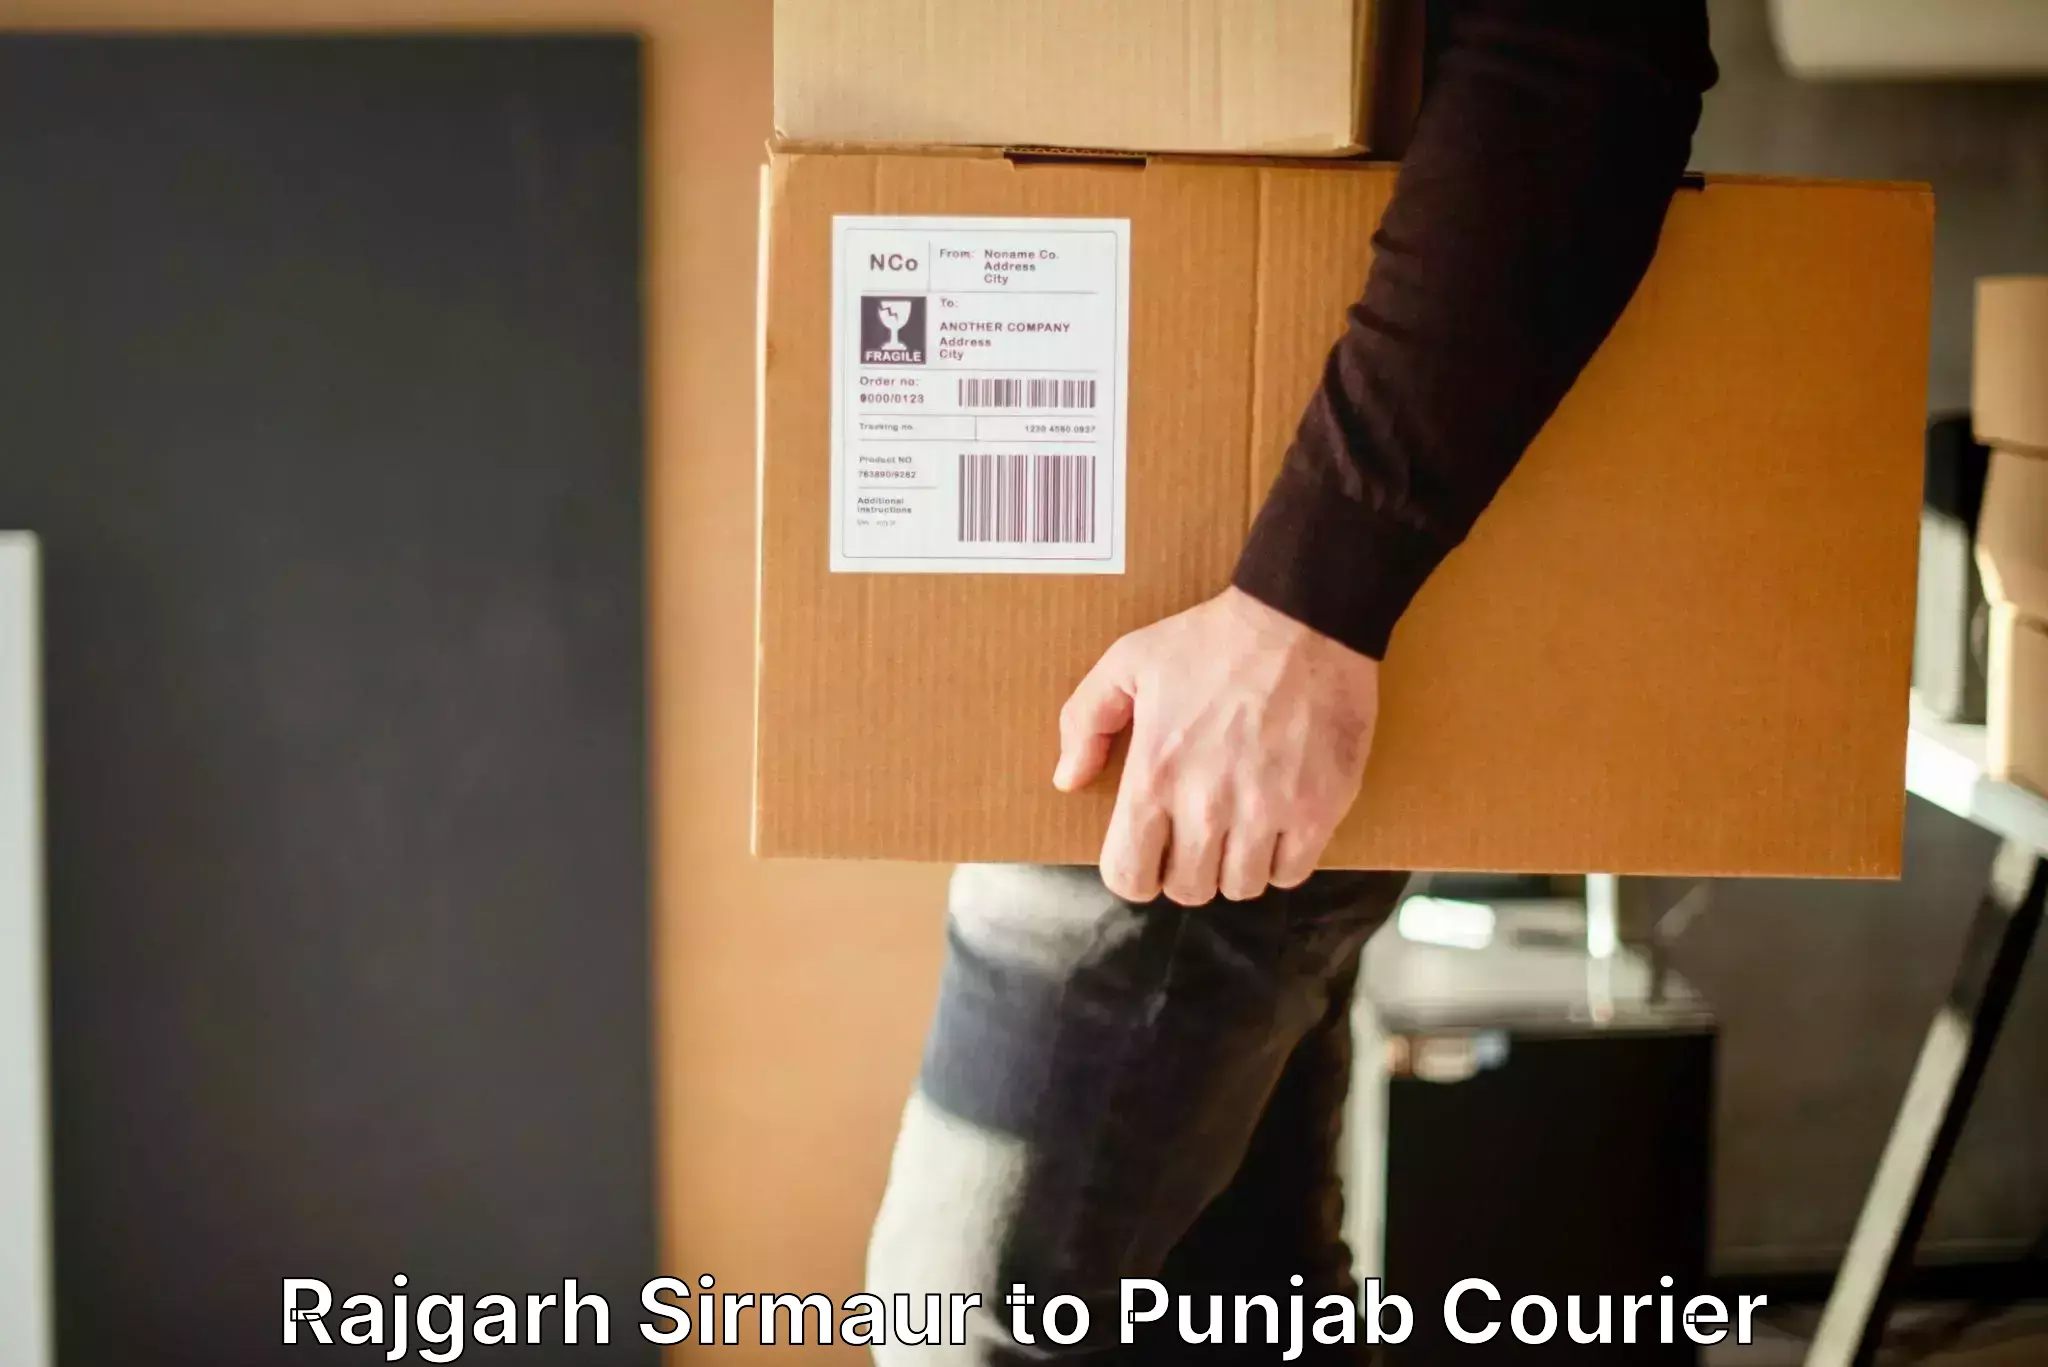 Luggage transport deals Rajgarh Sirmaur to Thapar Institute of Engineering and Technology Patiala